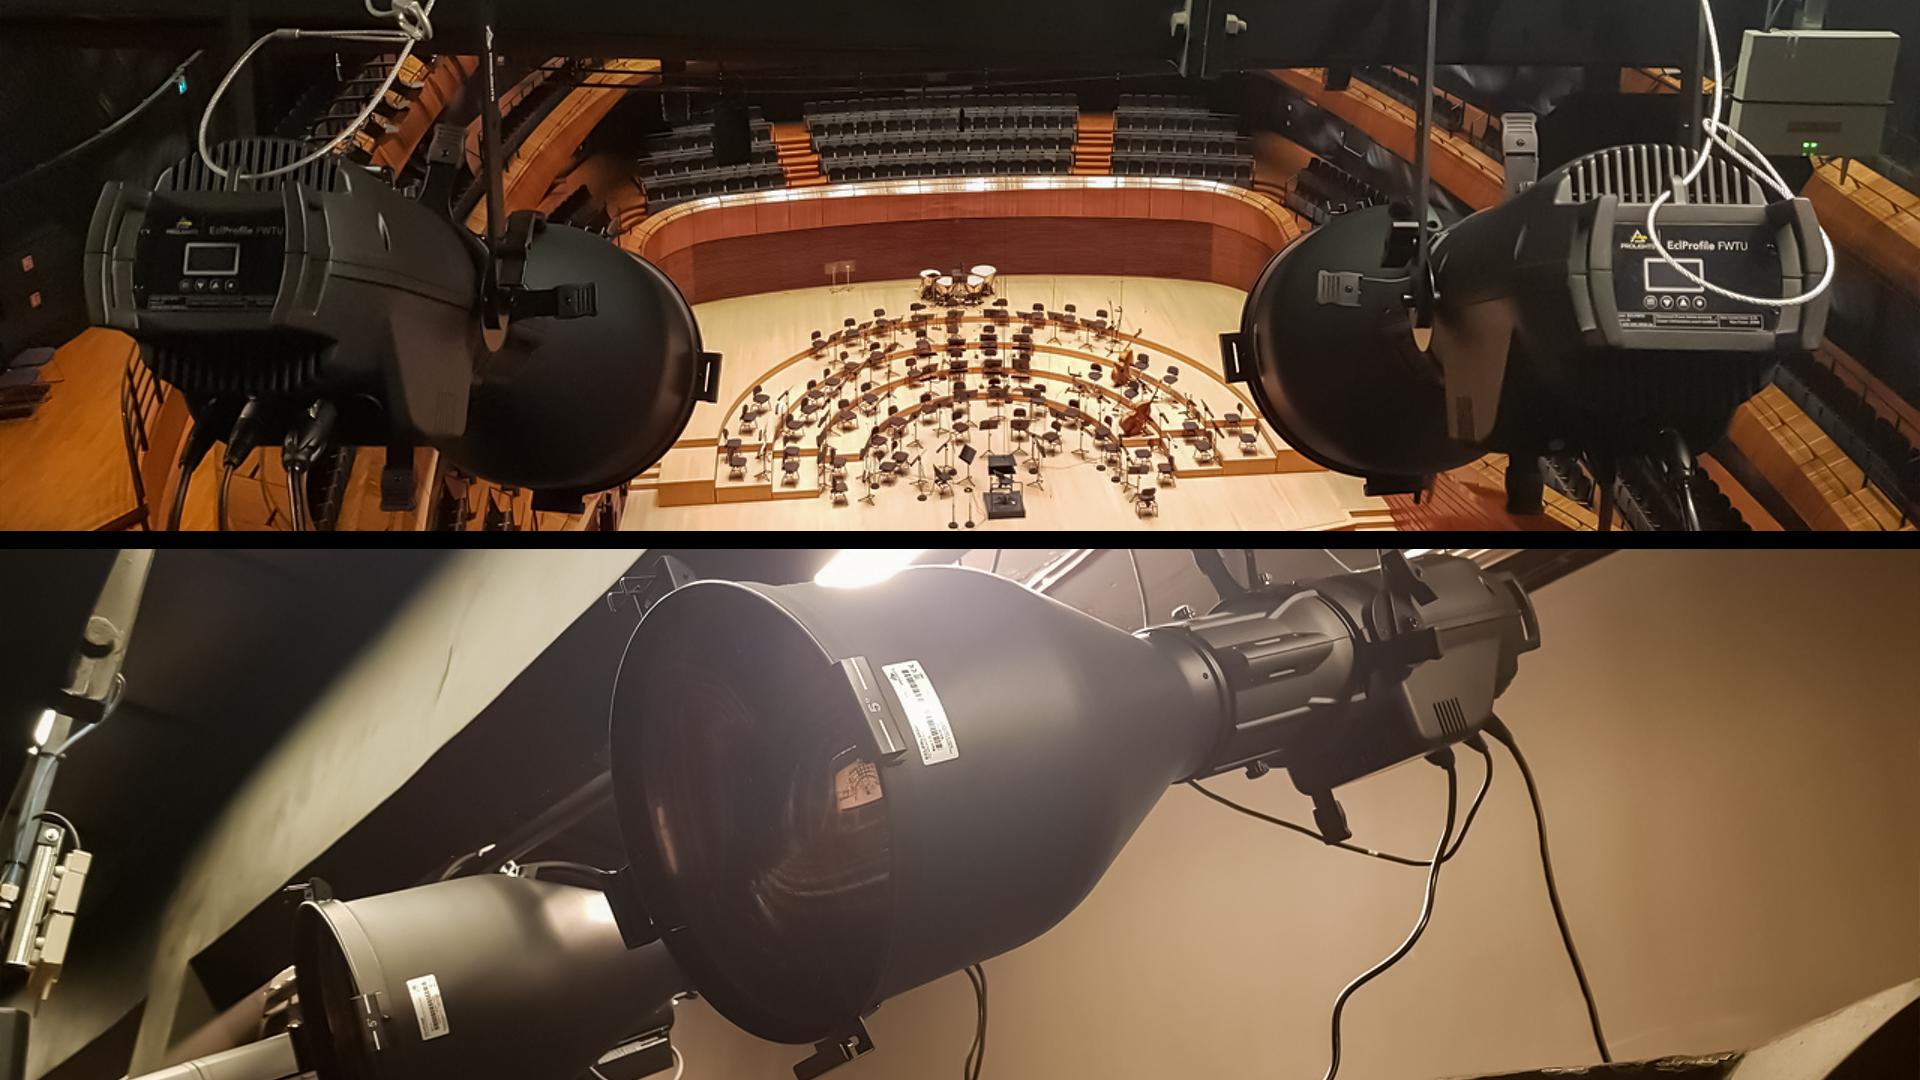 PROLIGHTS equip the National Polish Radio Symphony Orchestra with green technologies